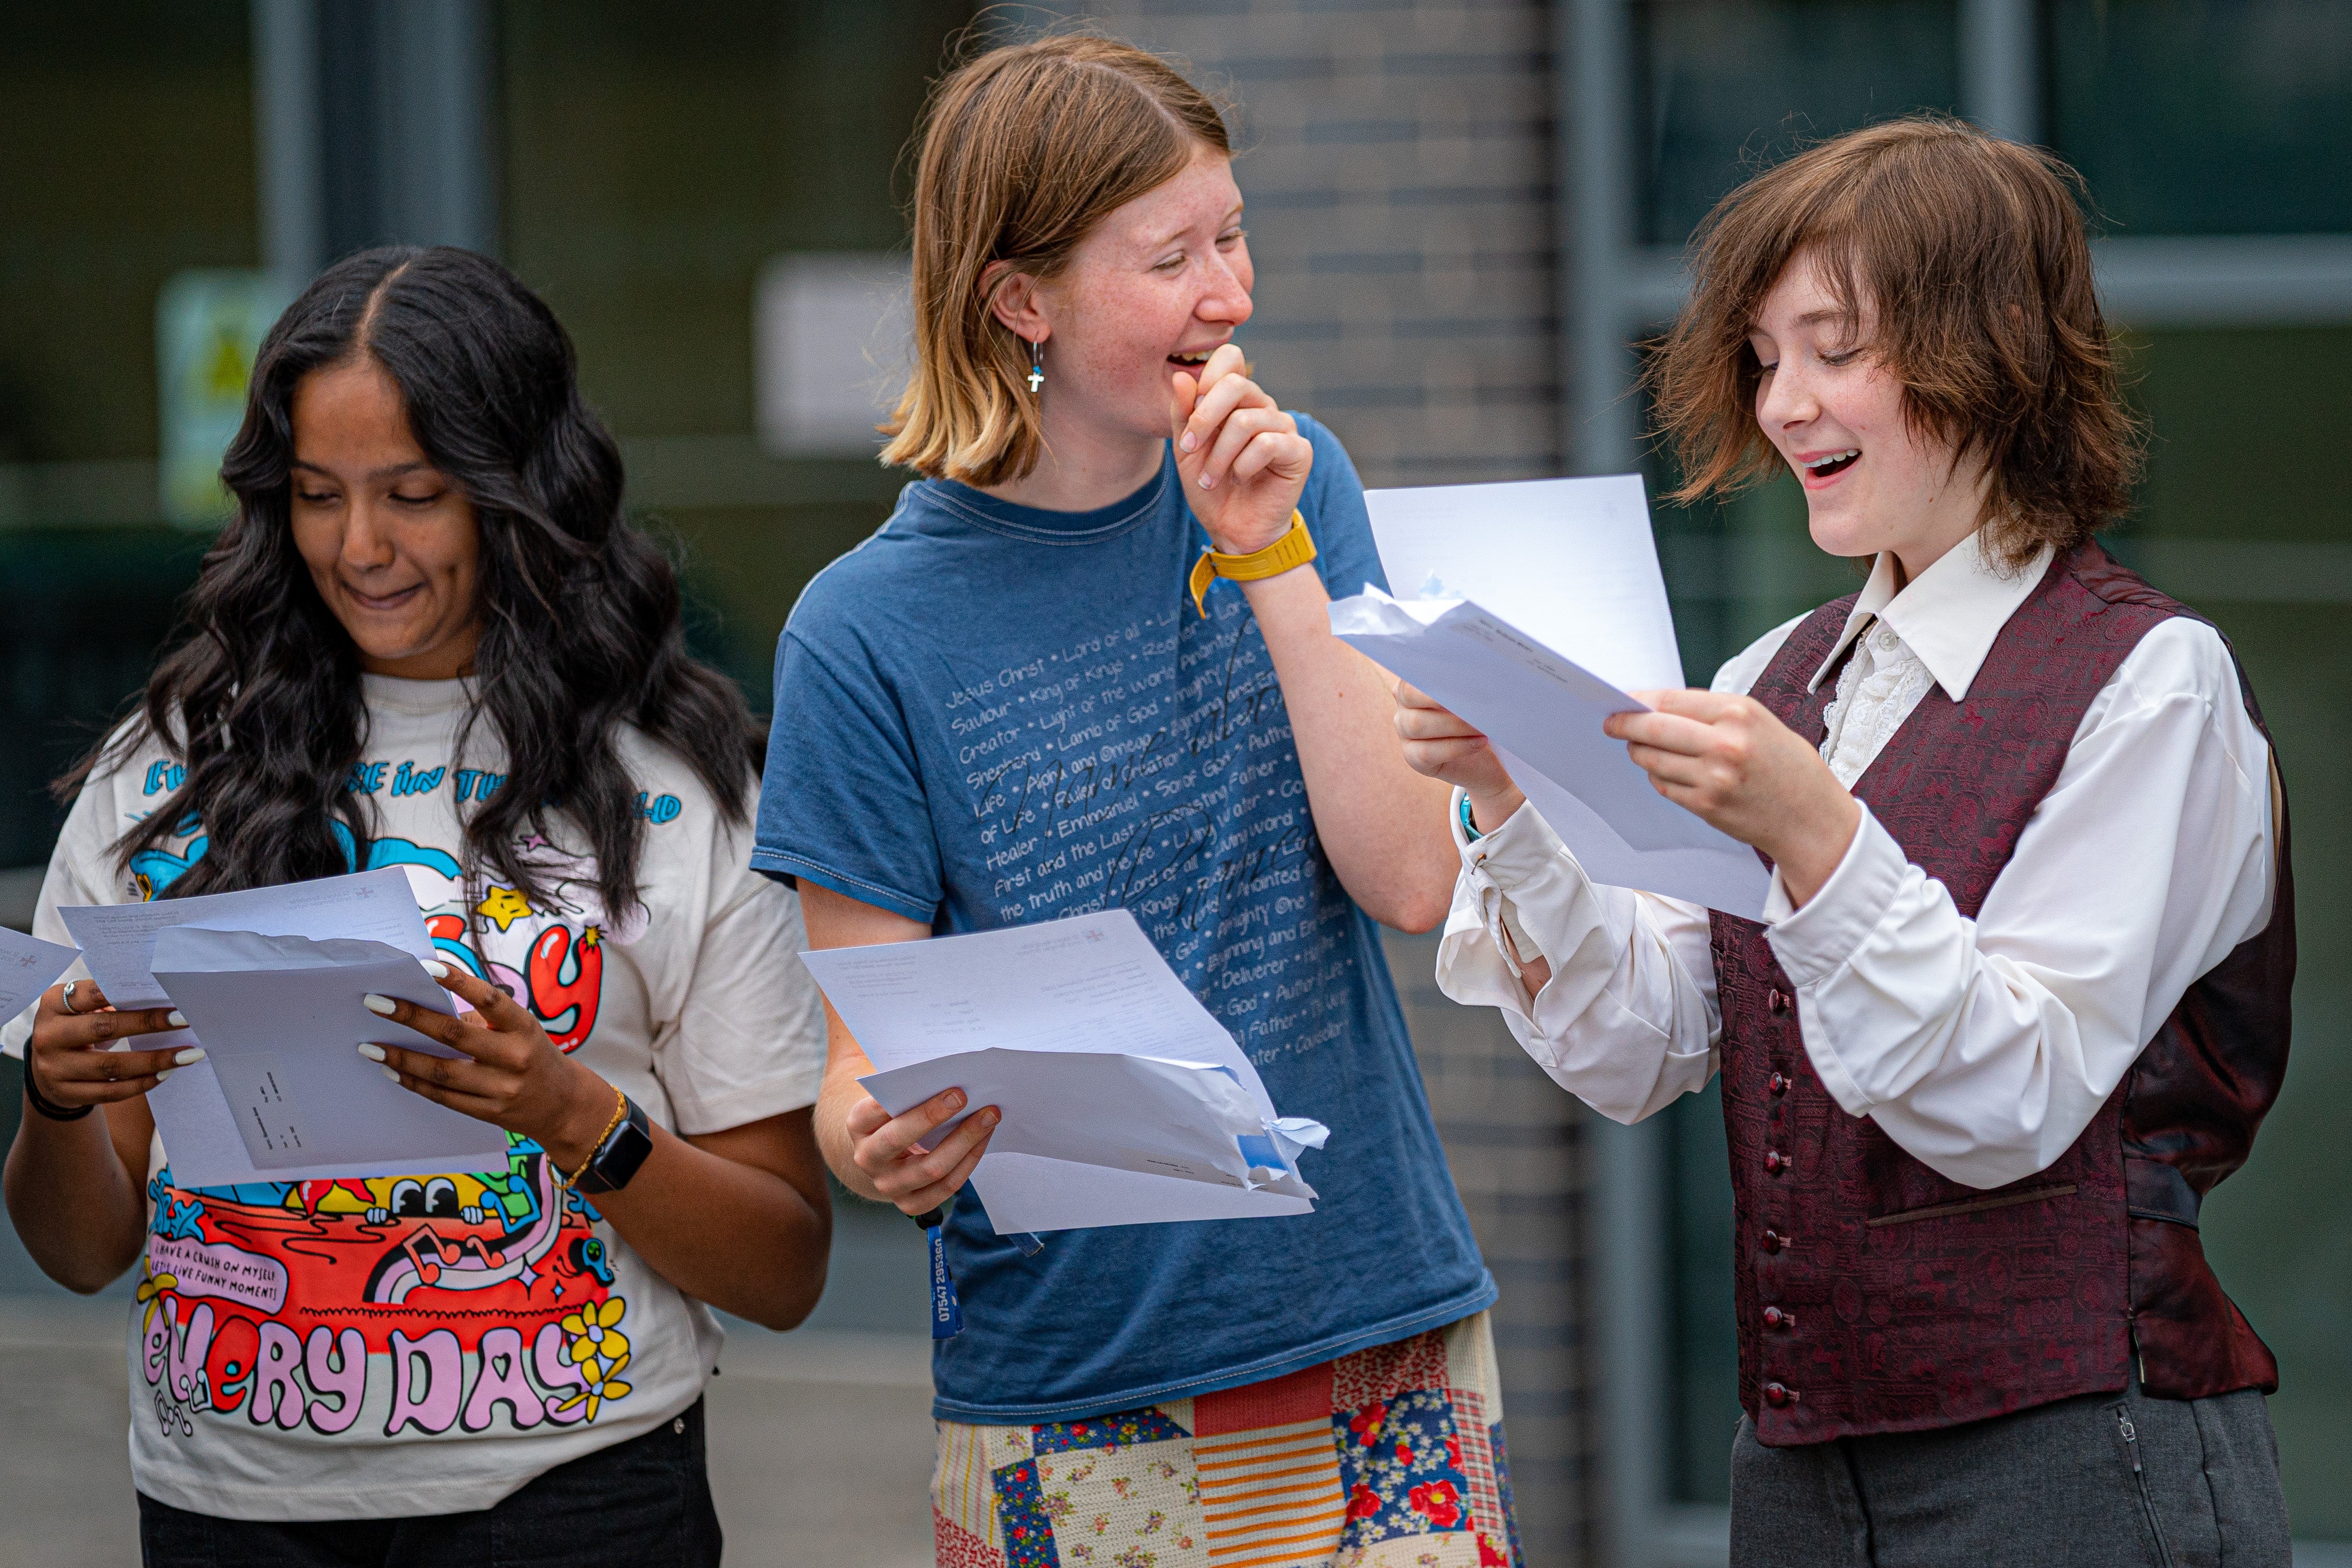 (from left) Anna Raveendran, Grace Ford and Miriam McGrath celebrate their results at St Mary Redcliffe and Temple School (Ben Birchall/PA)